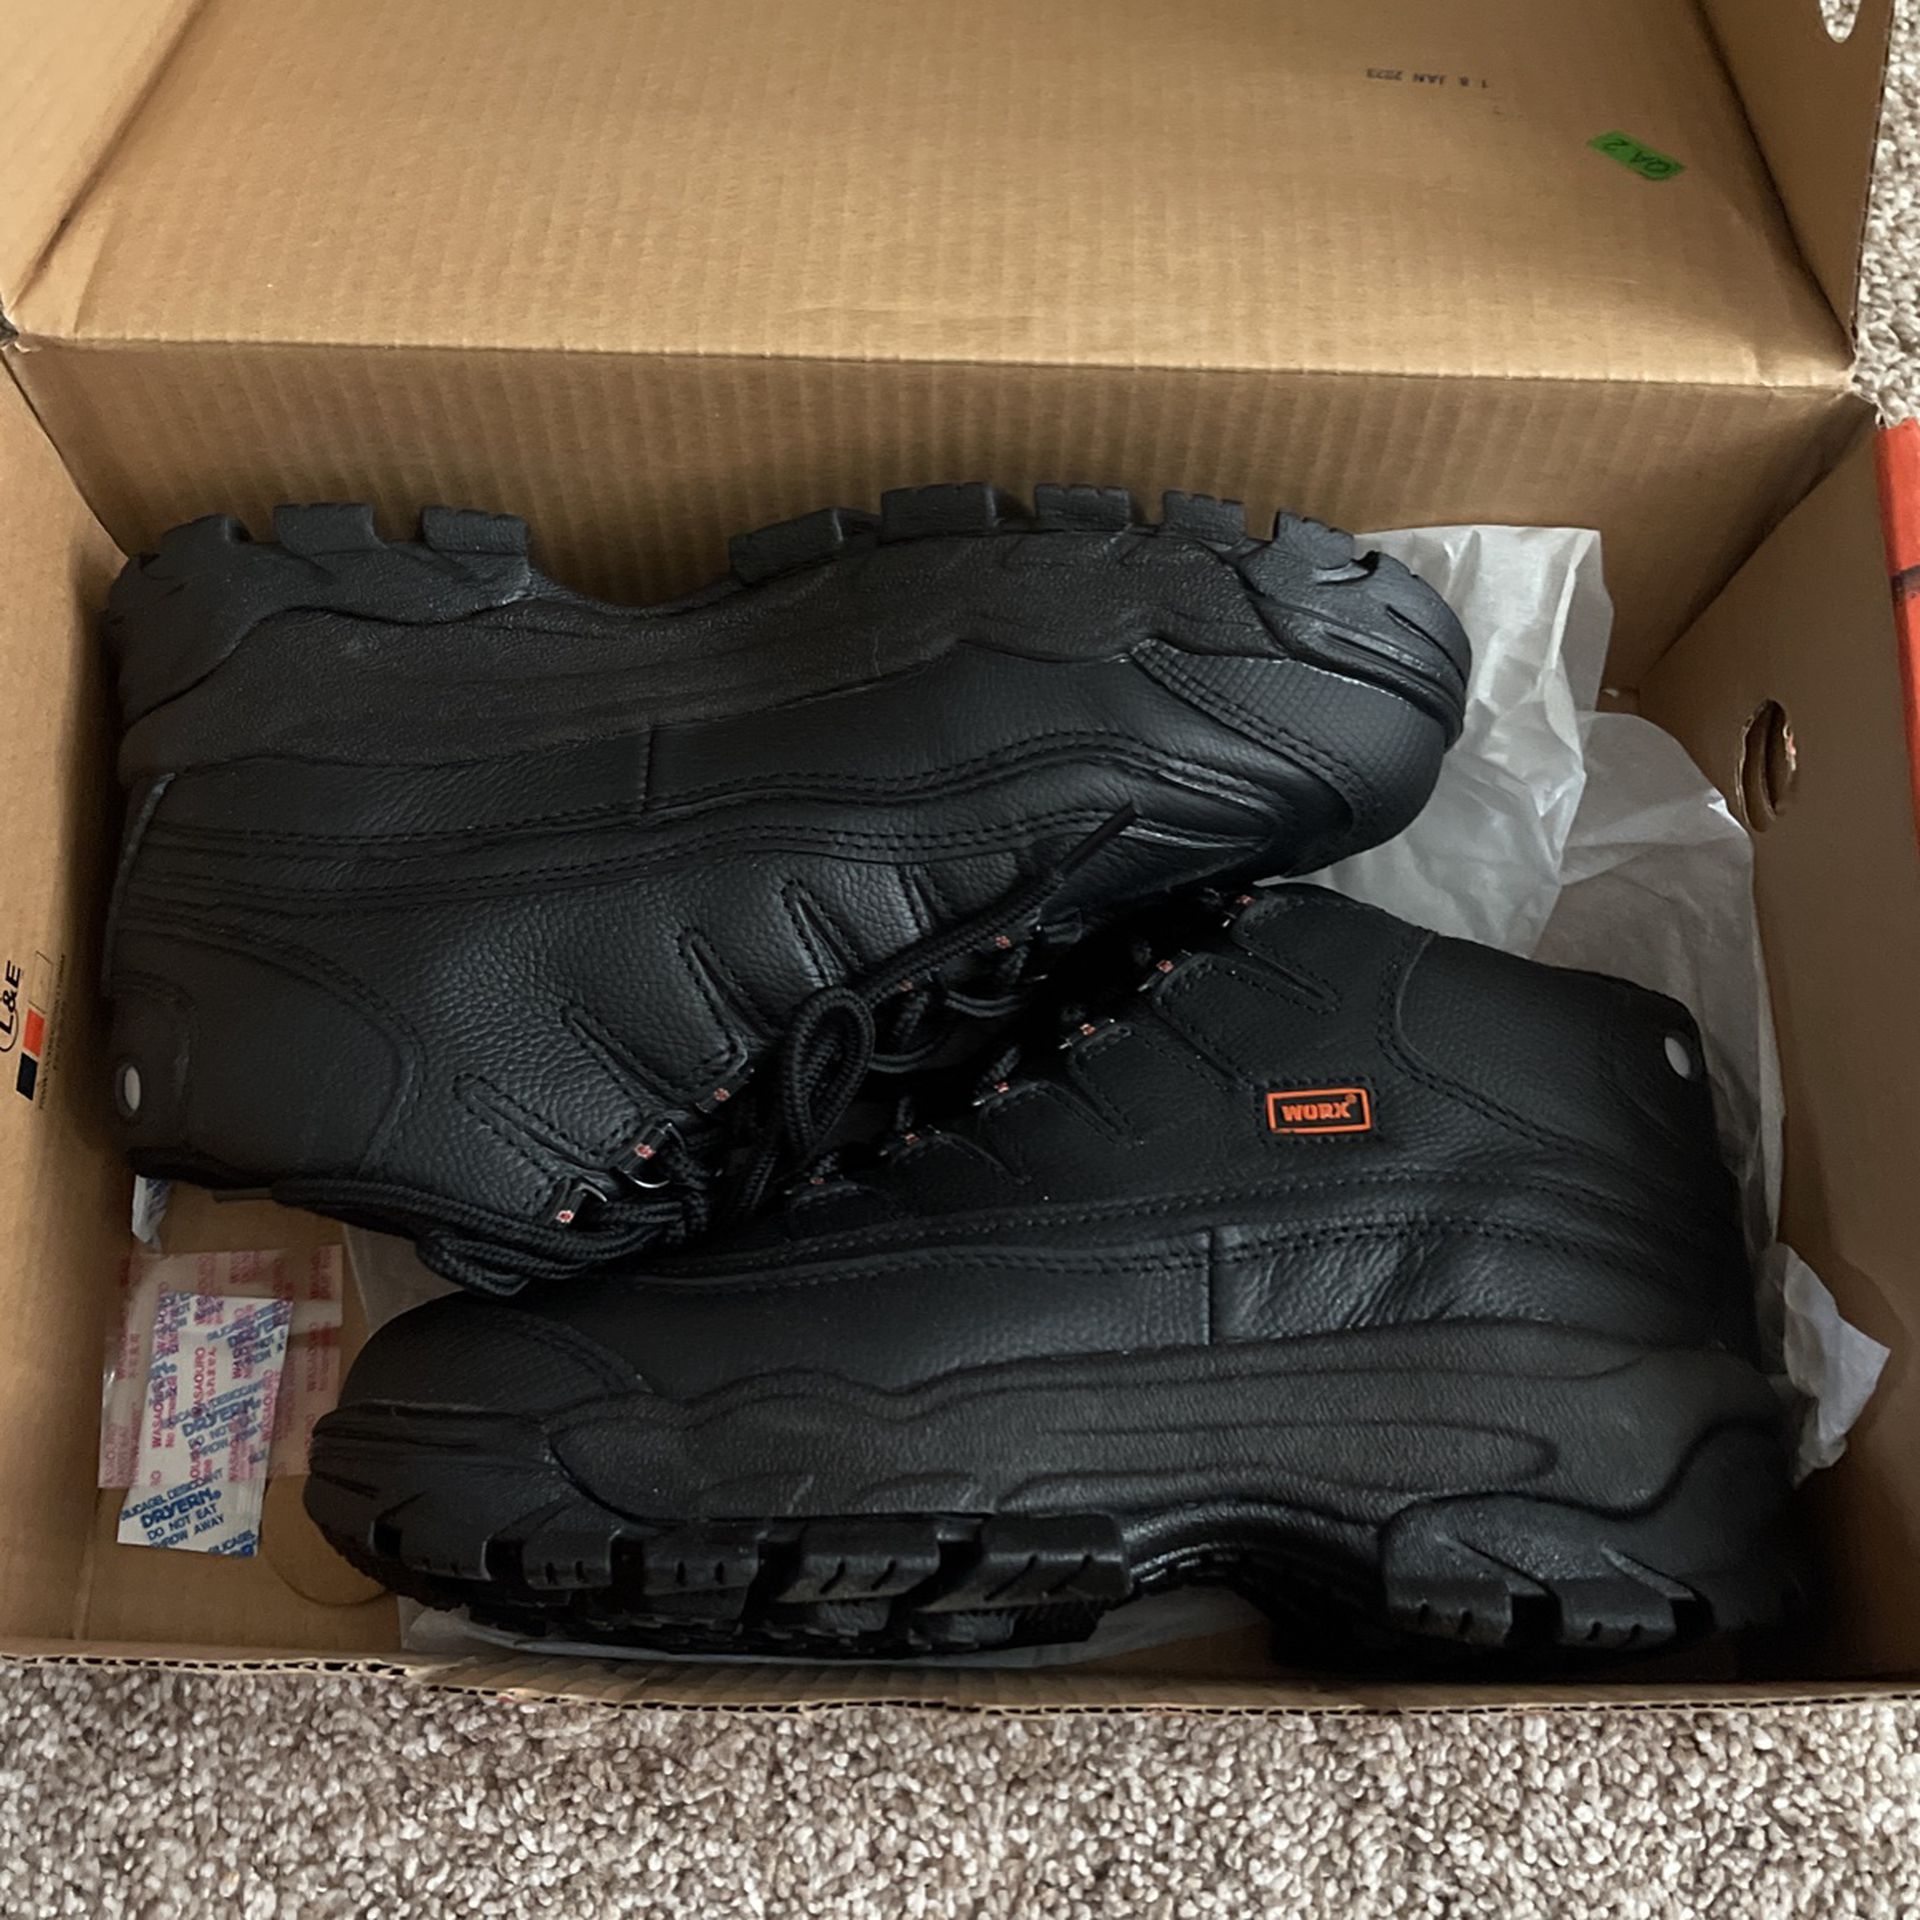 Steal Toe Boots Size 7 (Worx By Red Wing) 